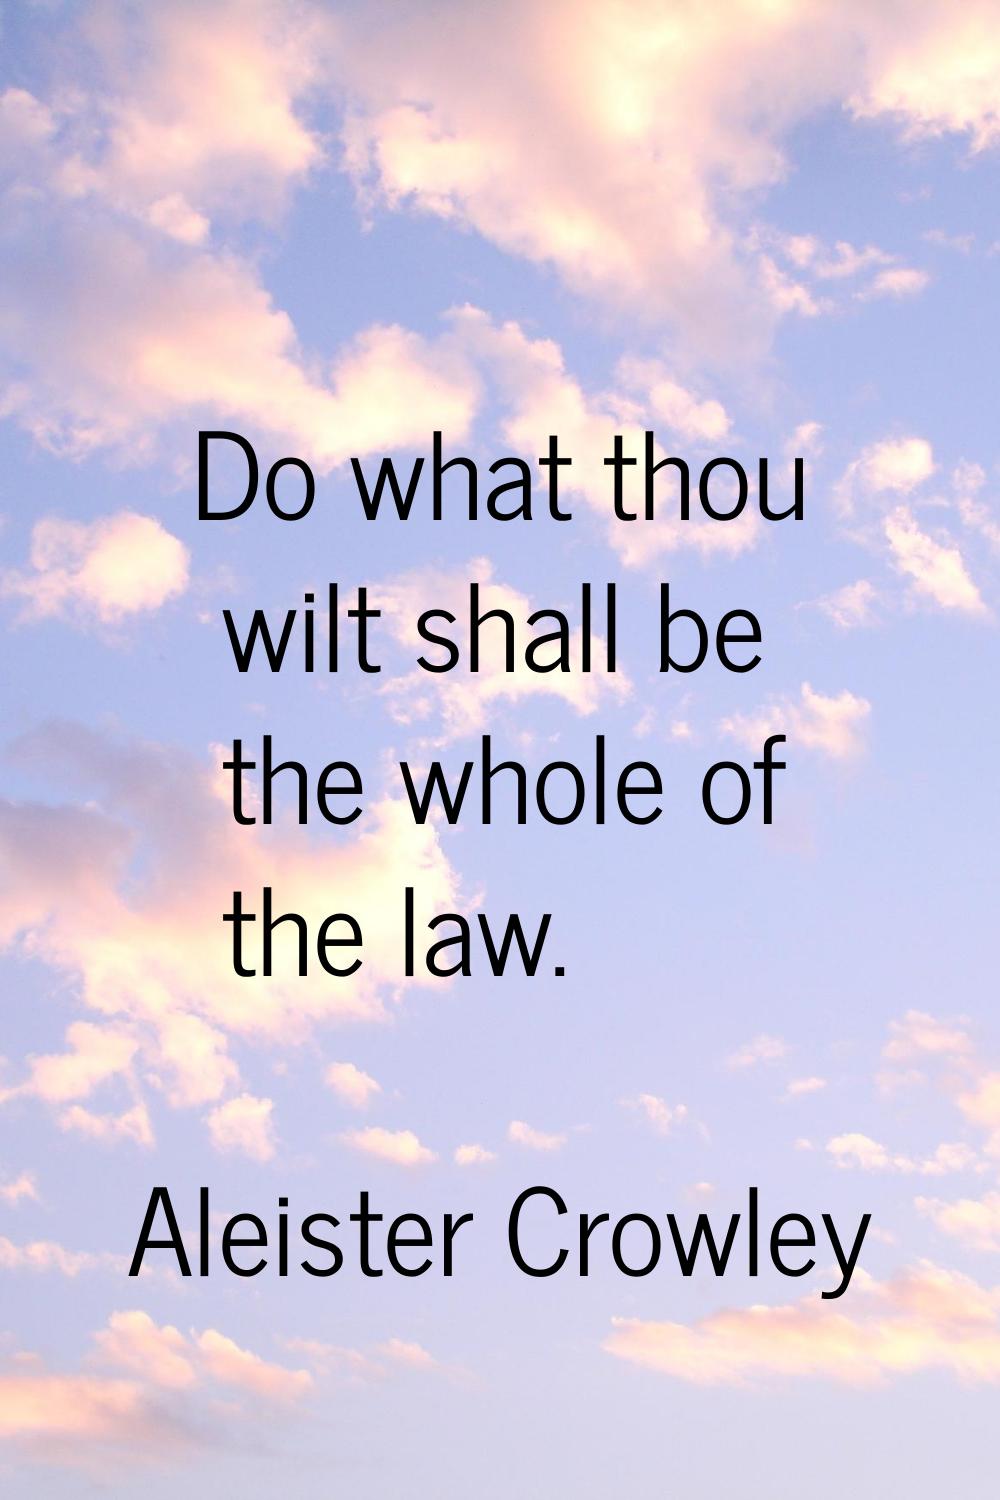 Do what thou wilt shall be the whole of the law.